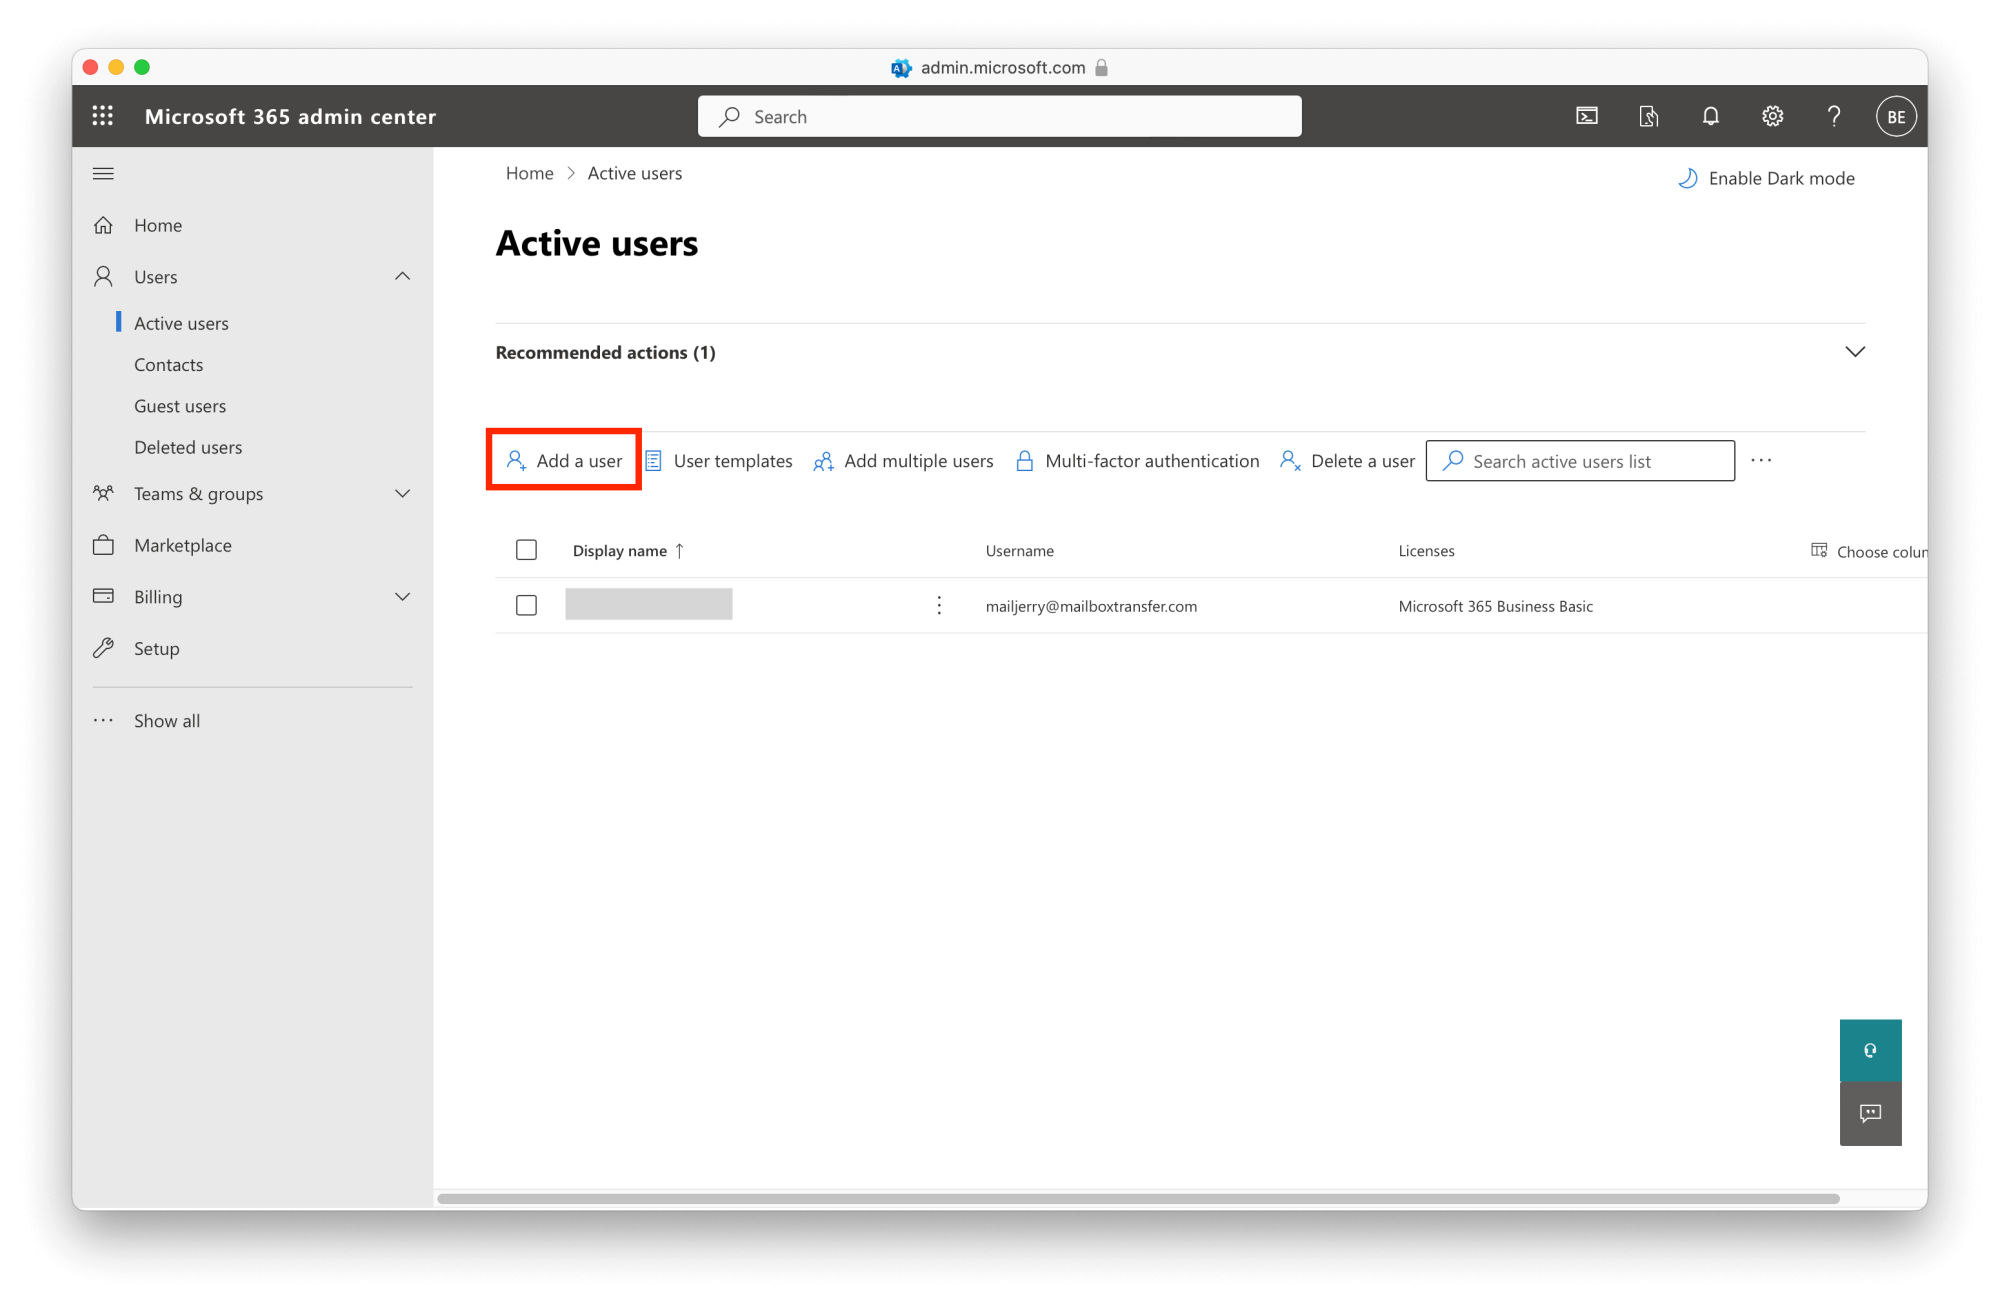 Migrate G Suite to Office 365: Add users to Office 365 – Step 01